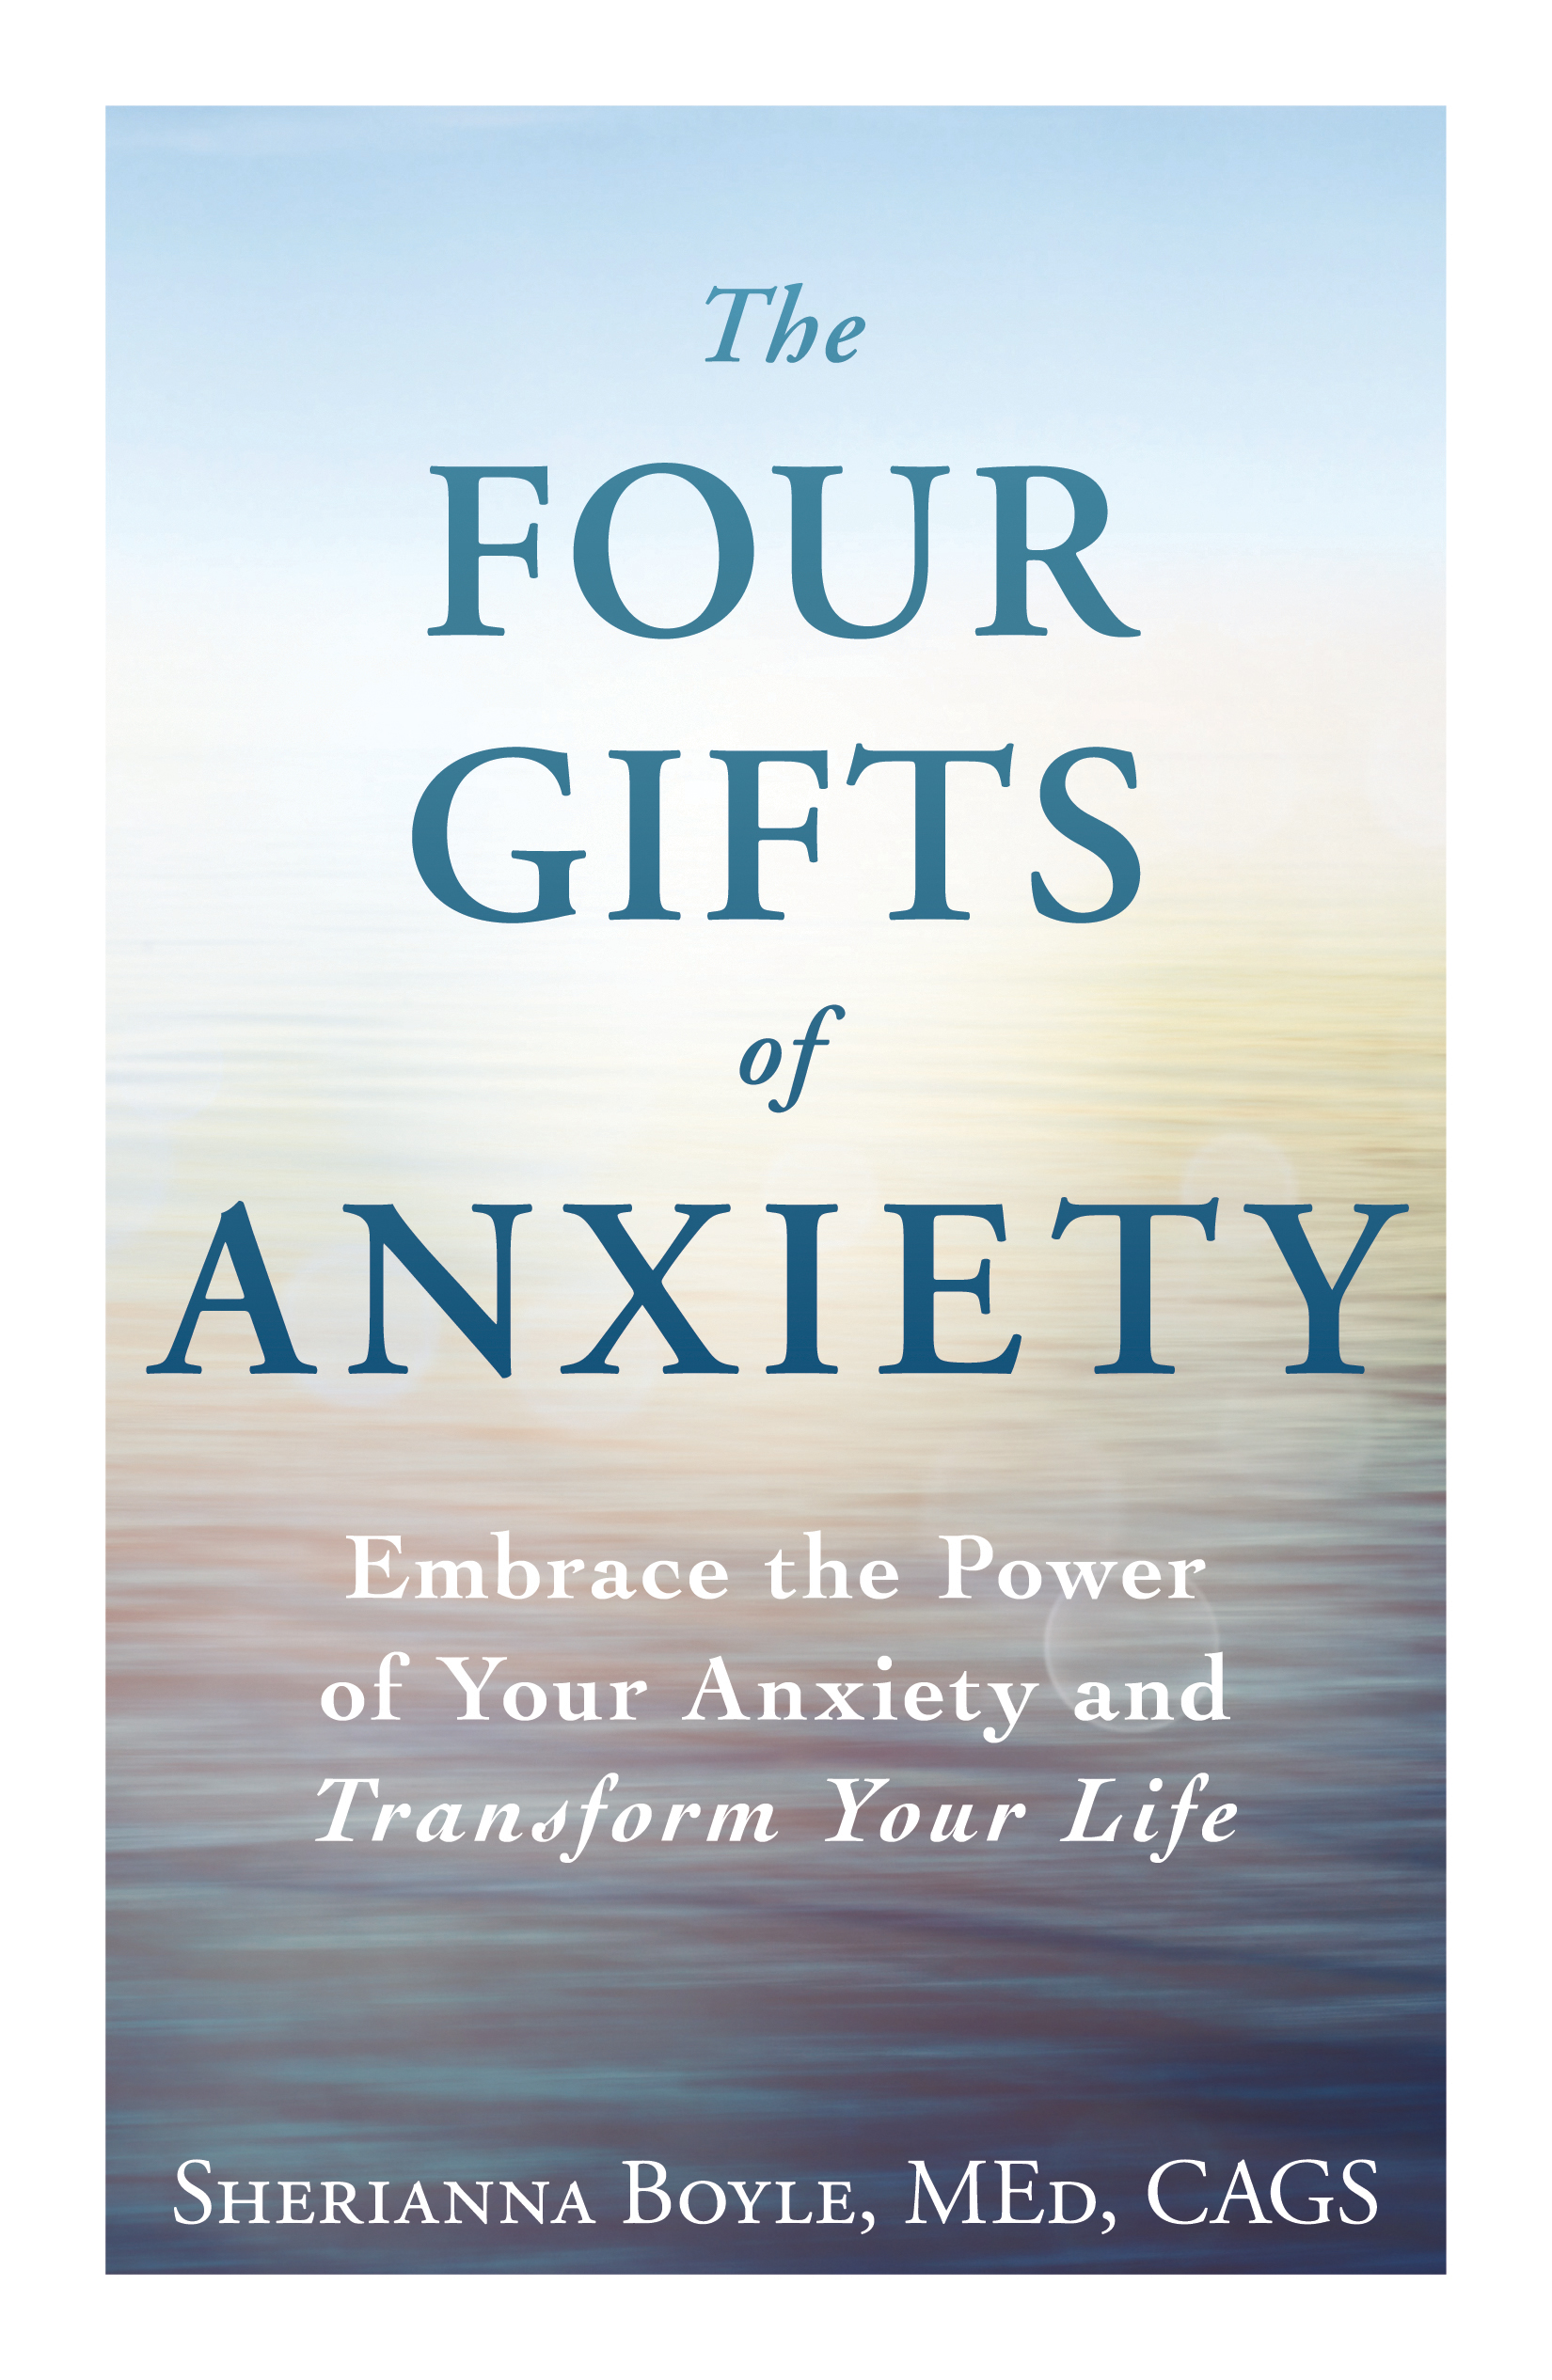 Is Anxiety Really a Gift?